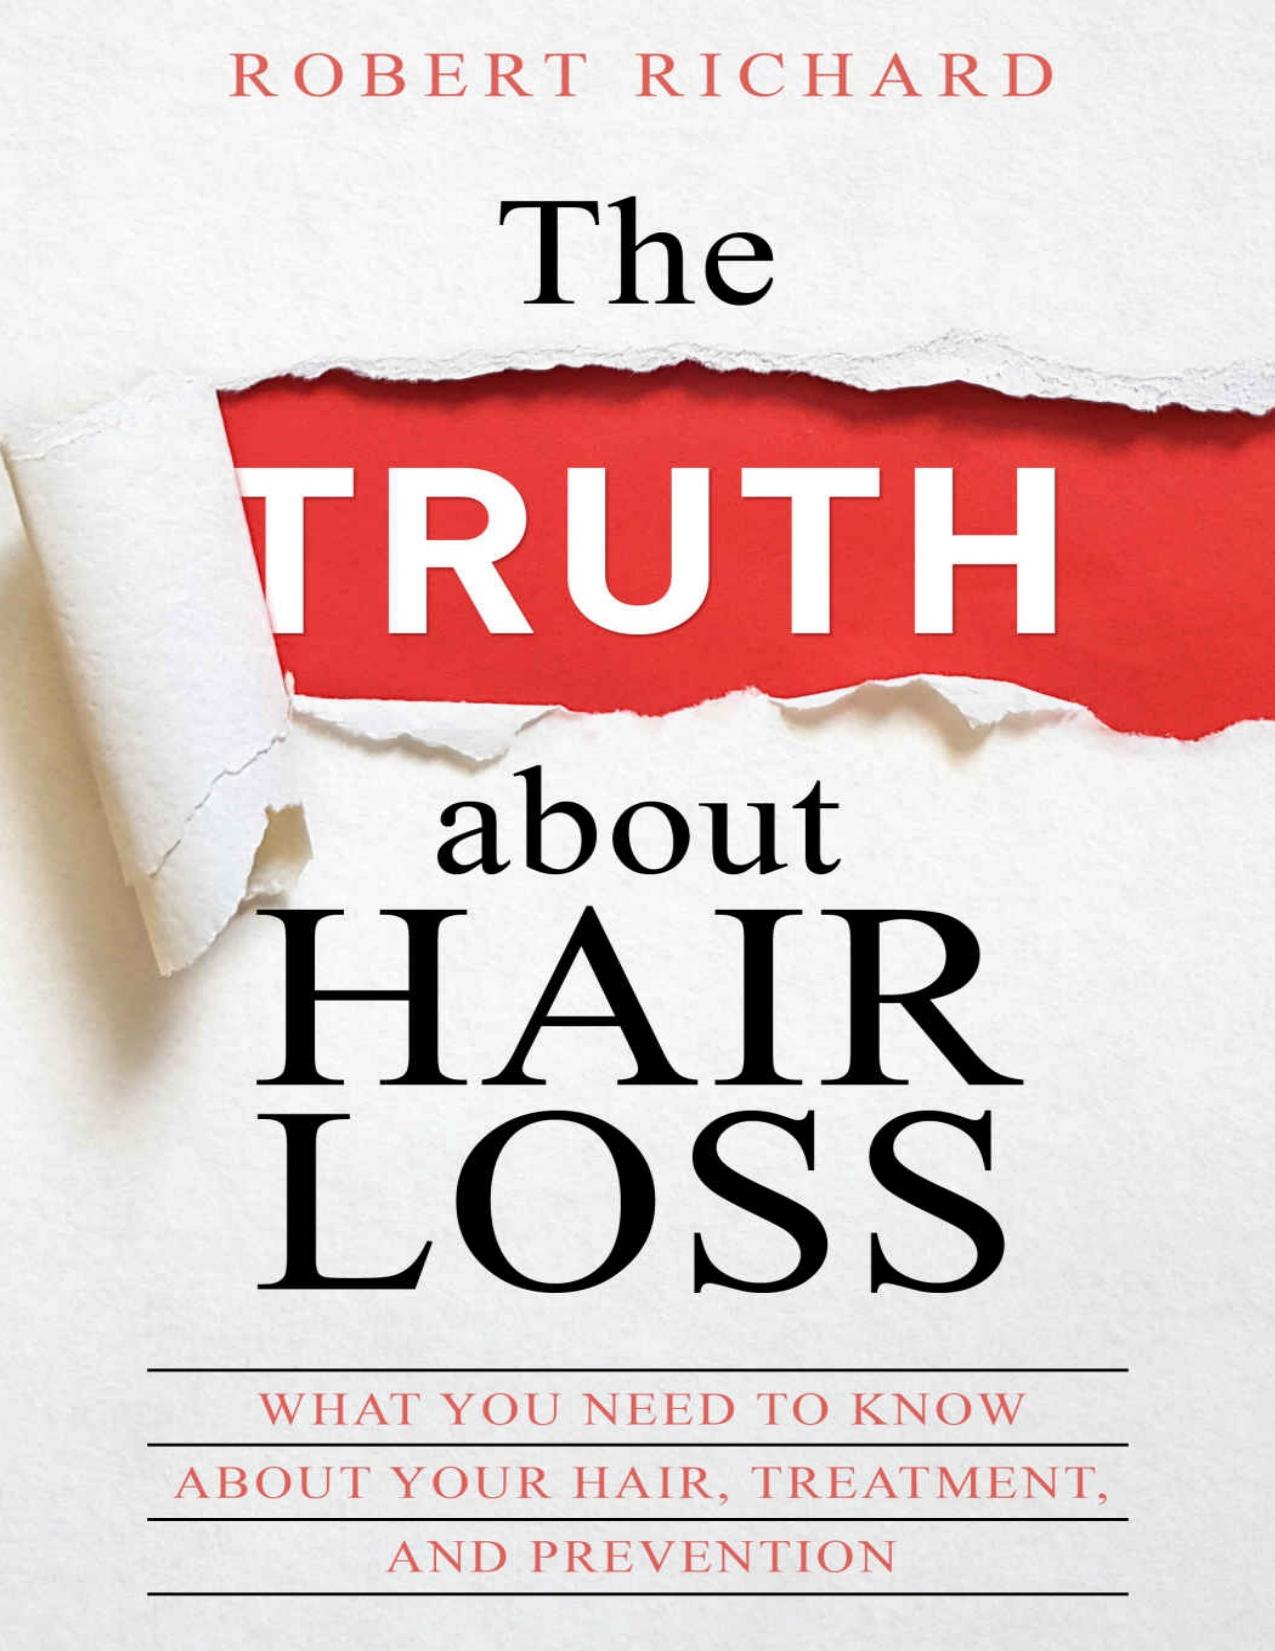 The TRUTH about Hair Loss: What You Need to Know about Your Hair, Treatment, and Prevention \(Hair Loss cure, Alopecia, MPB, Male pattern baldness, Hair Loss Treatment\) - PDFDrive.com